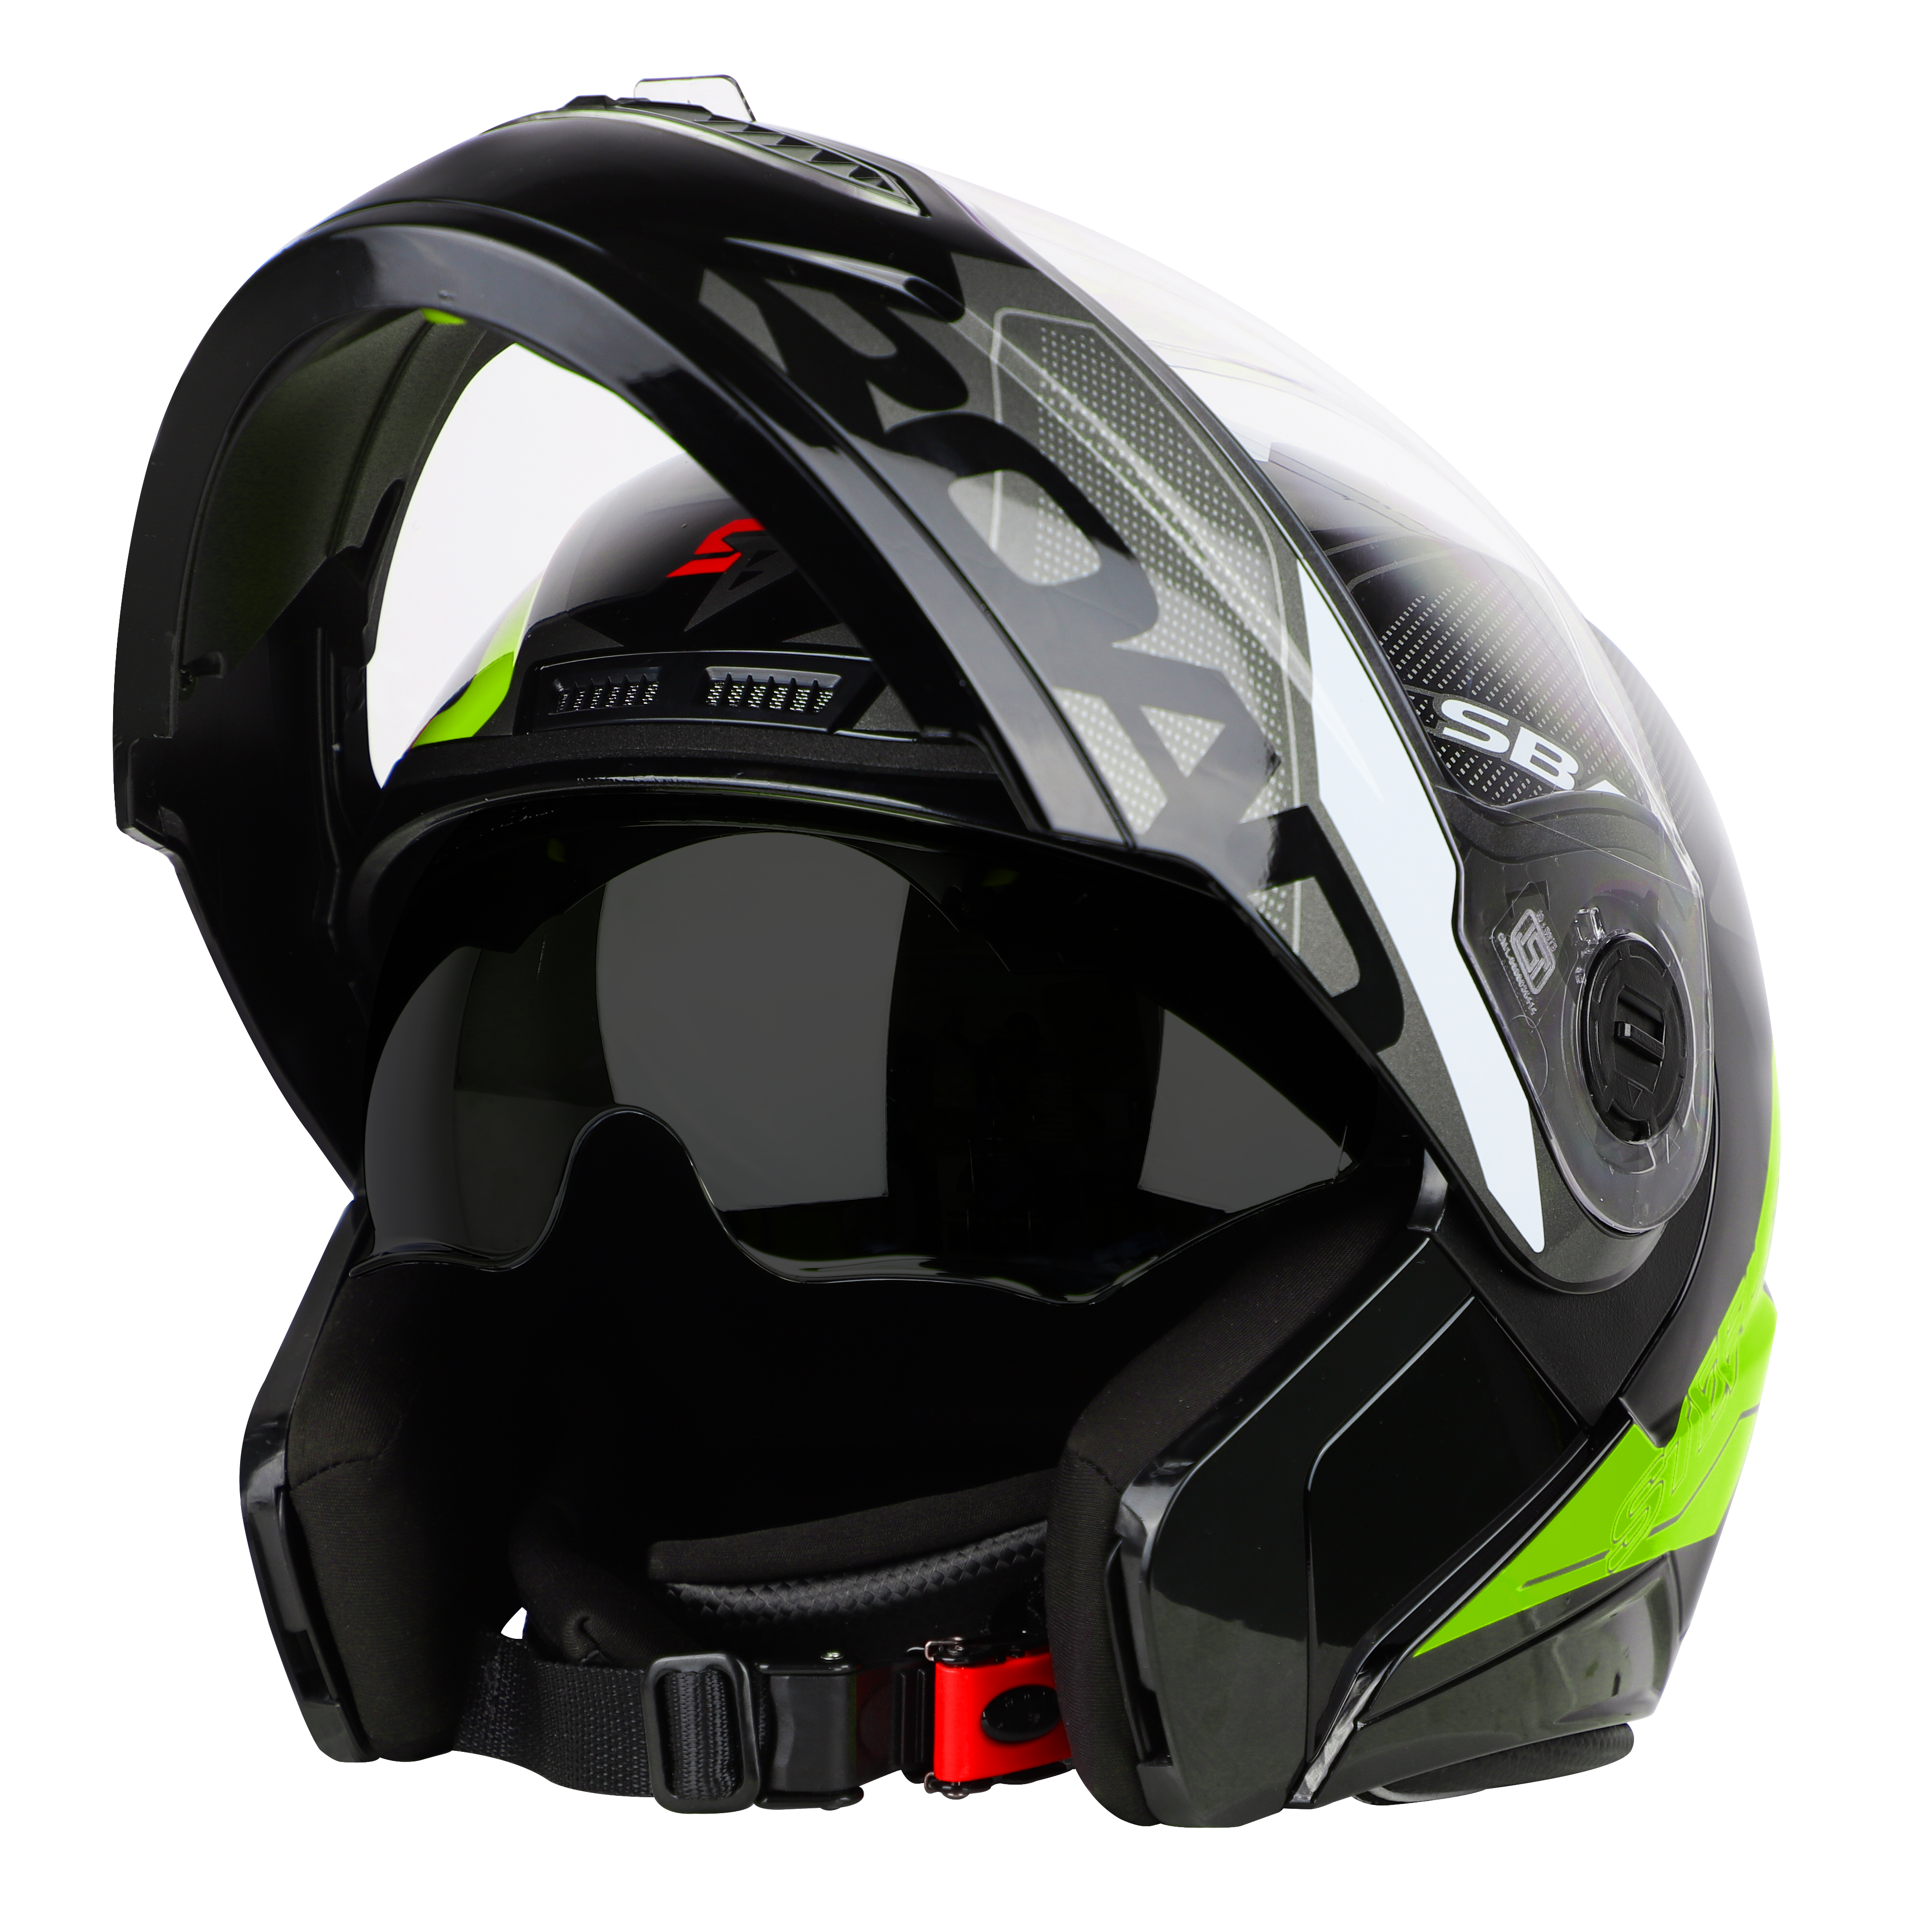 SBA-7 ROAD GLOSSY BLACK WITH NEON (WITH INNER SUNSHIELD)